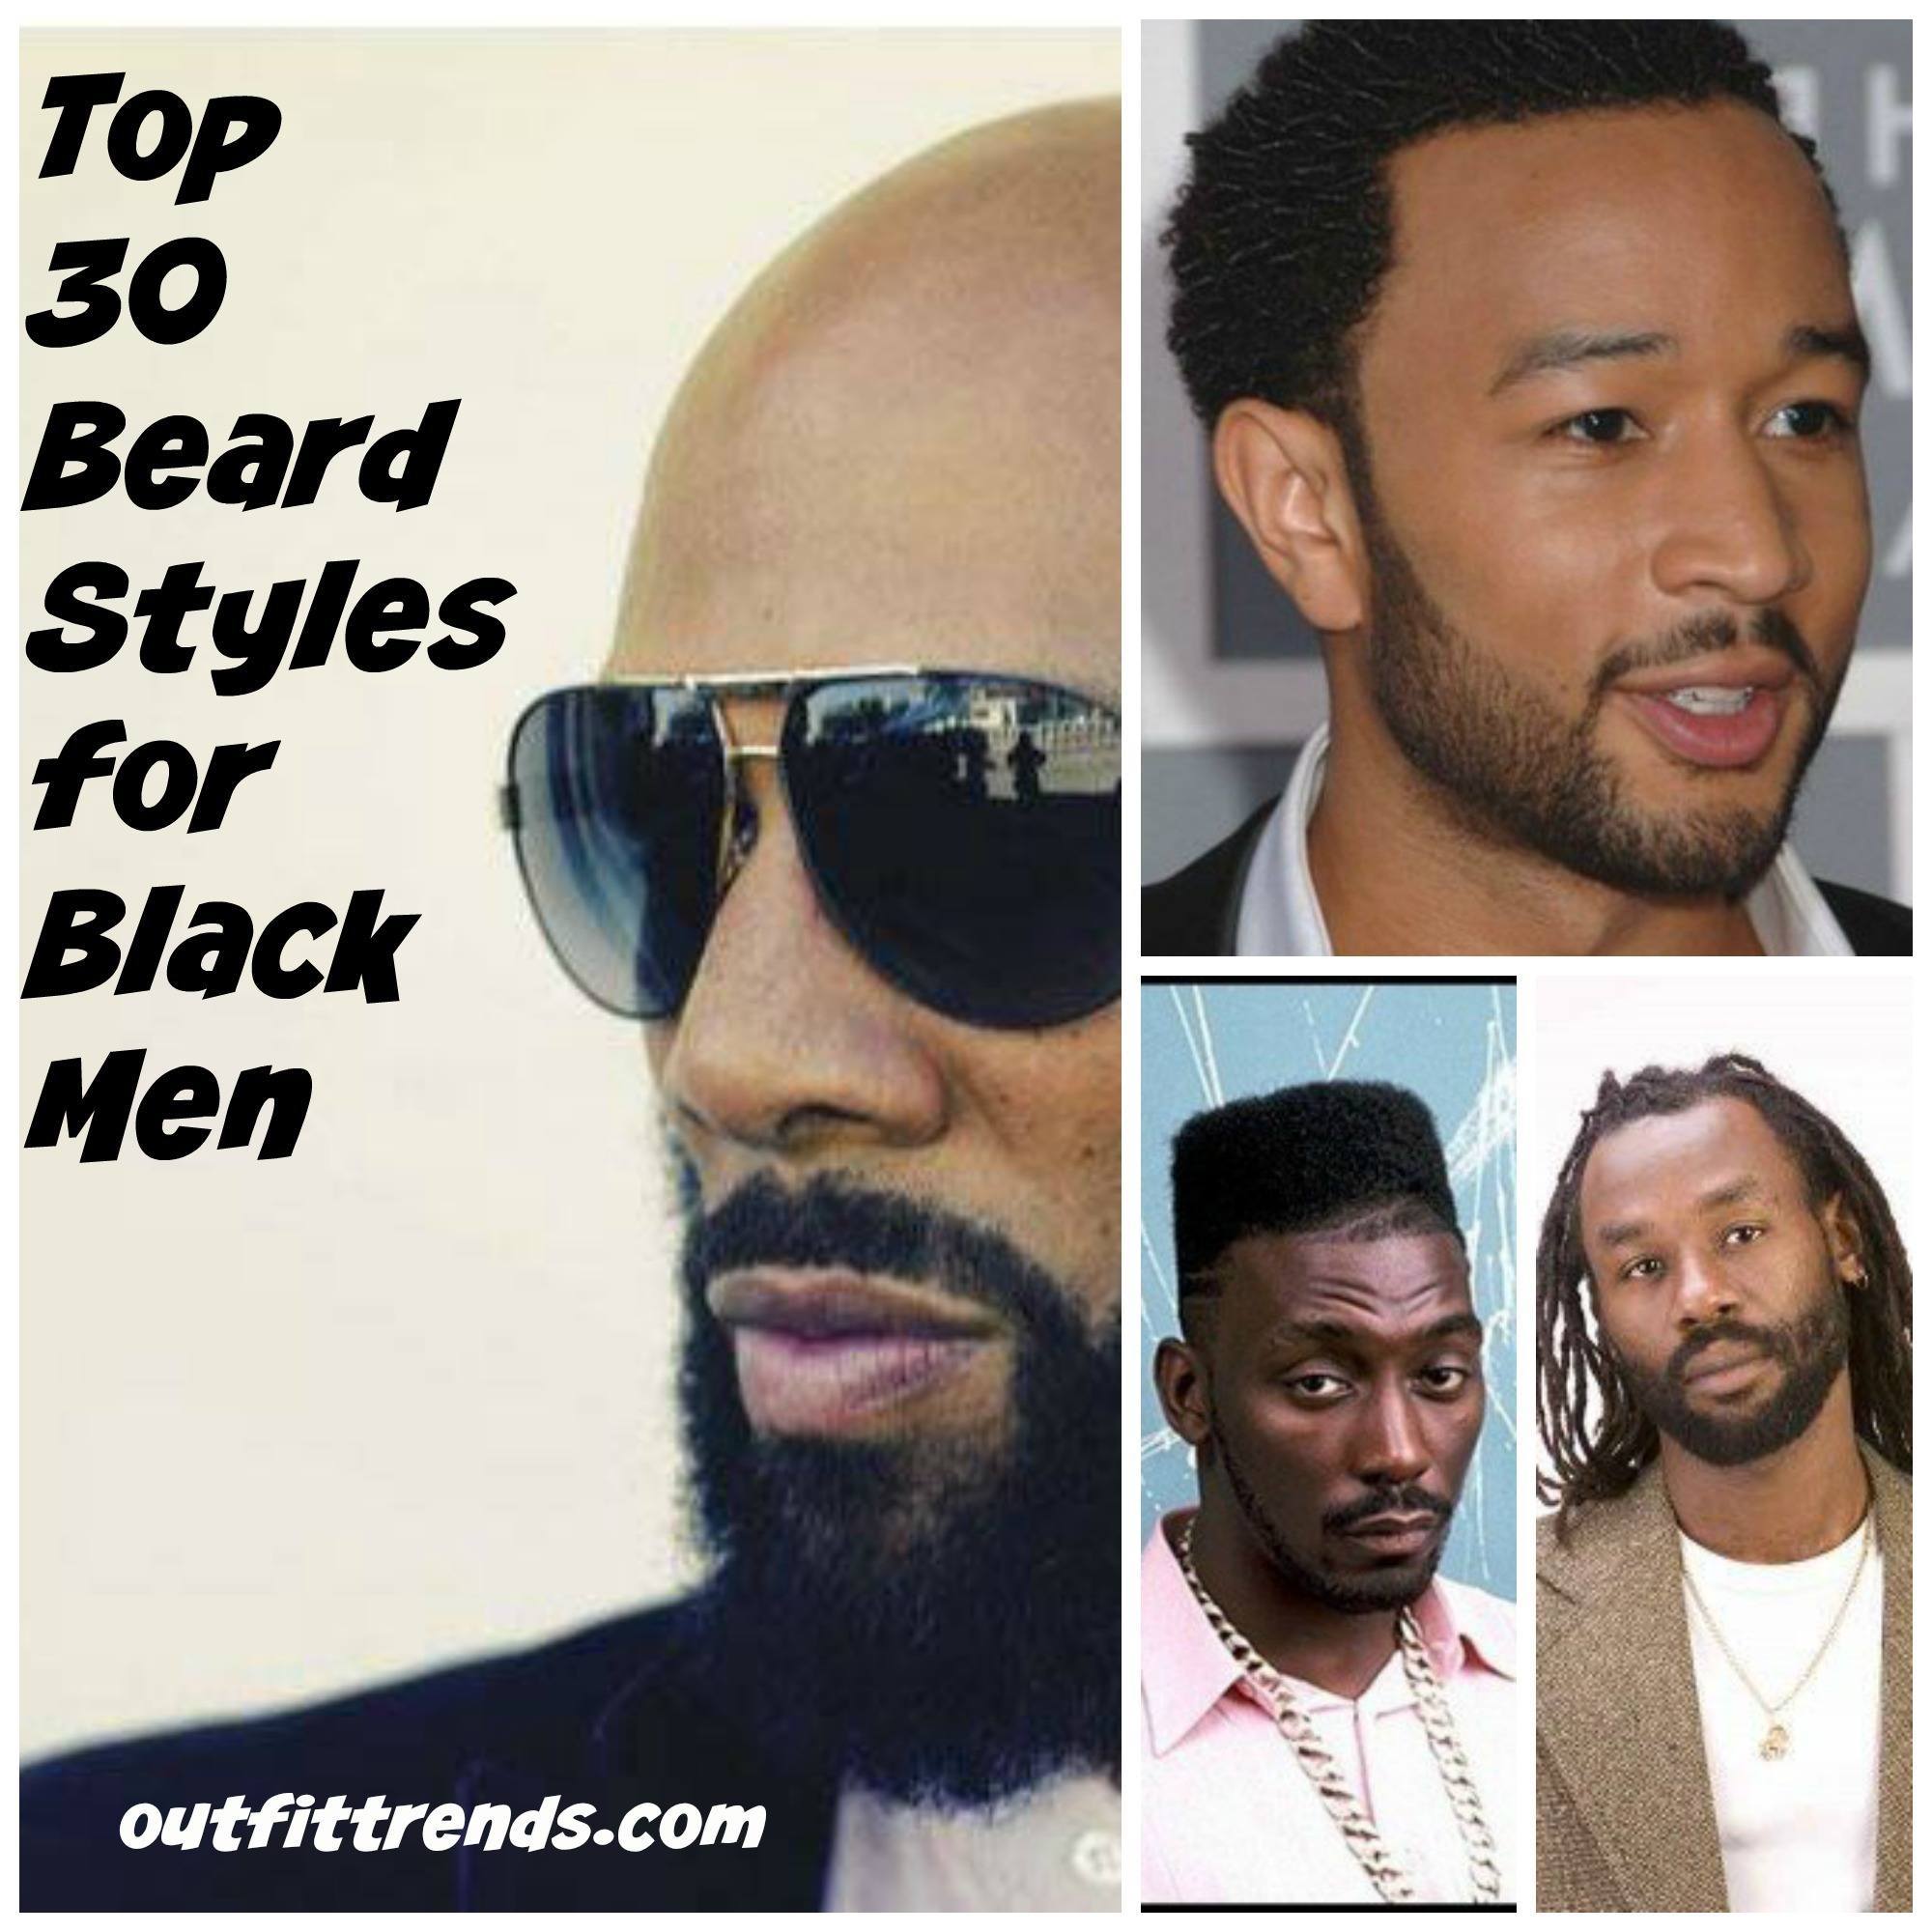 Latest Beard Styles for Black Men - 30 Hottest Facial Hairs